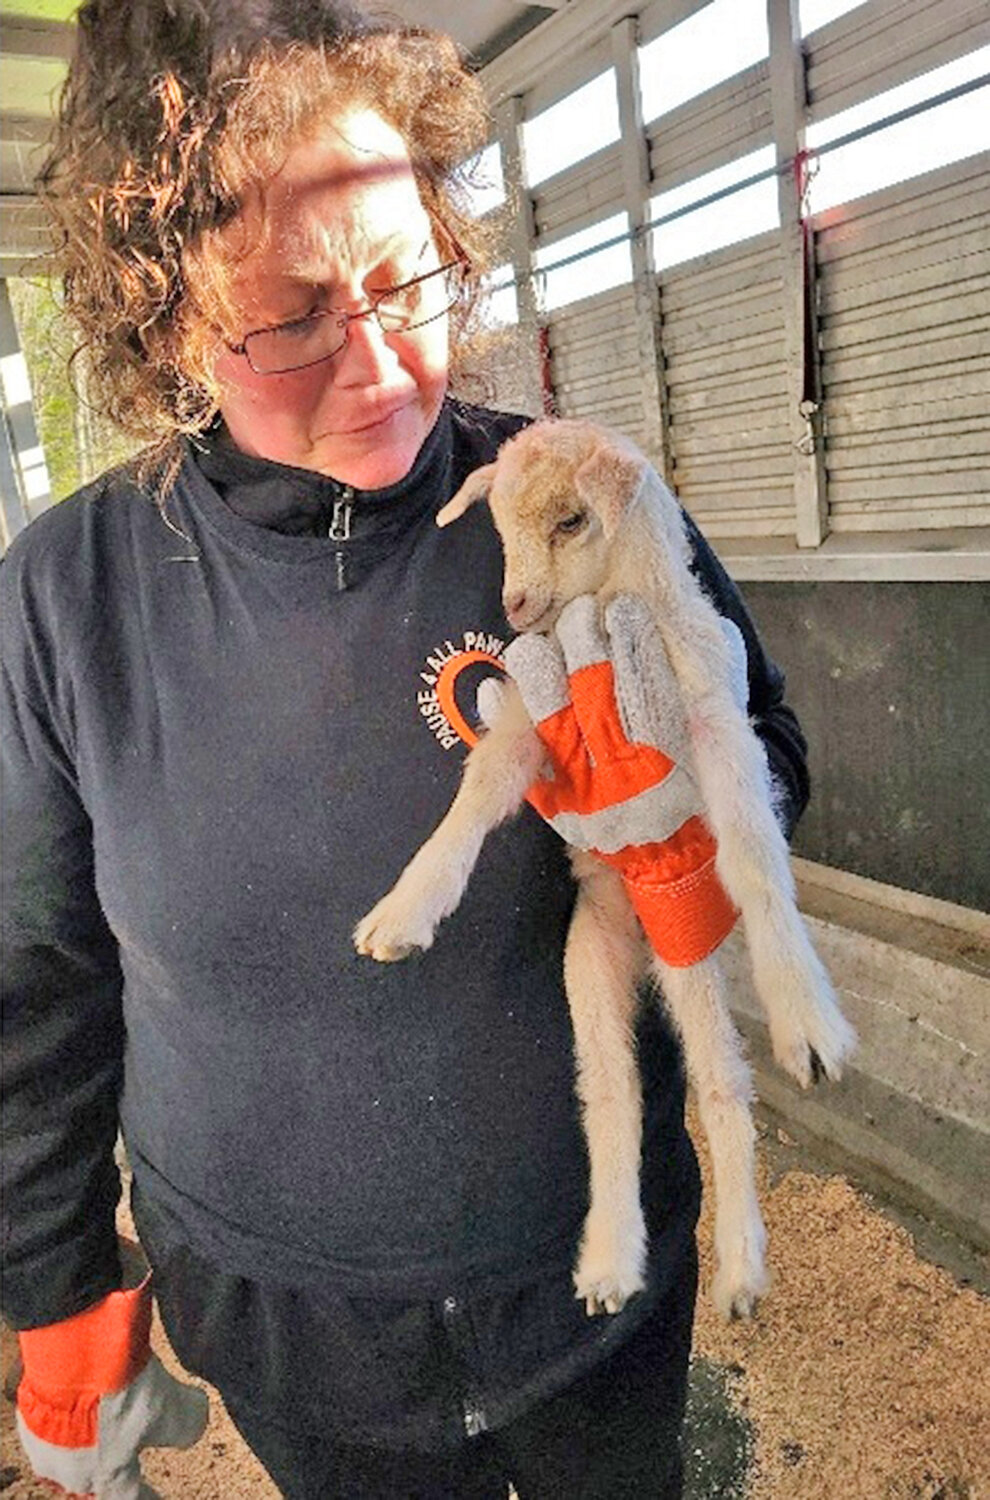 An animal rescuer holds one of several dozen mistreated goats as part of an animal cruelty case in the Town of Norway in Herkimer County, according to the New York State Police.